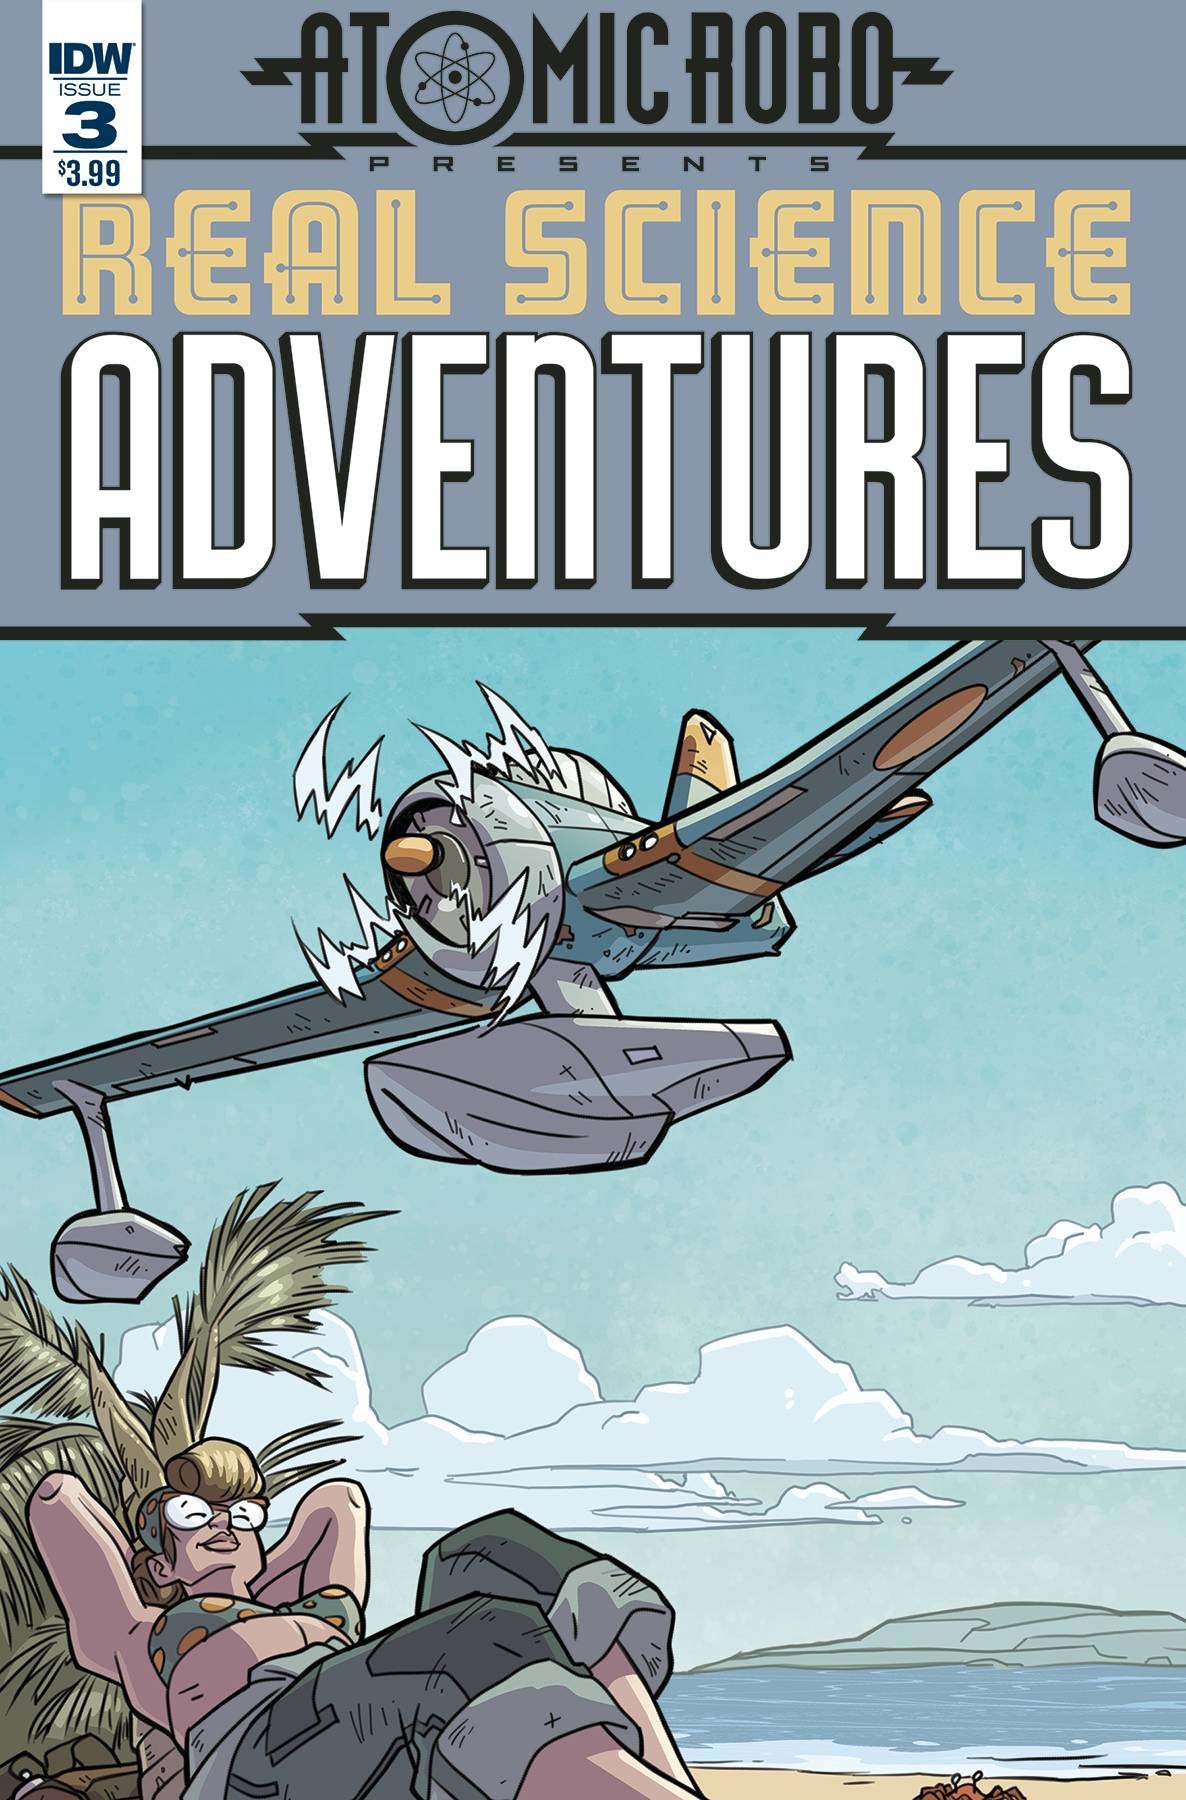 REAL SCIENCE ADVENTURES FLYING SHE-DEVILS #3 (OF 6) COVER